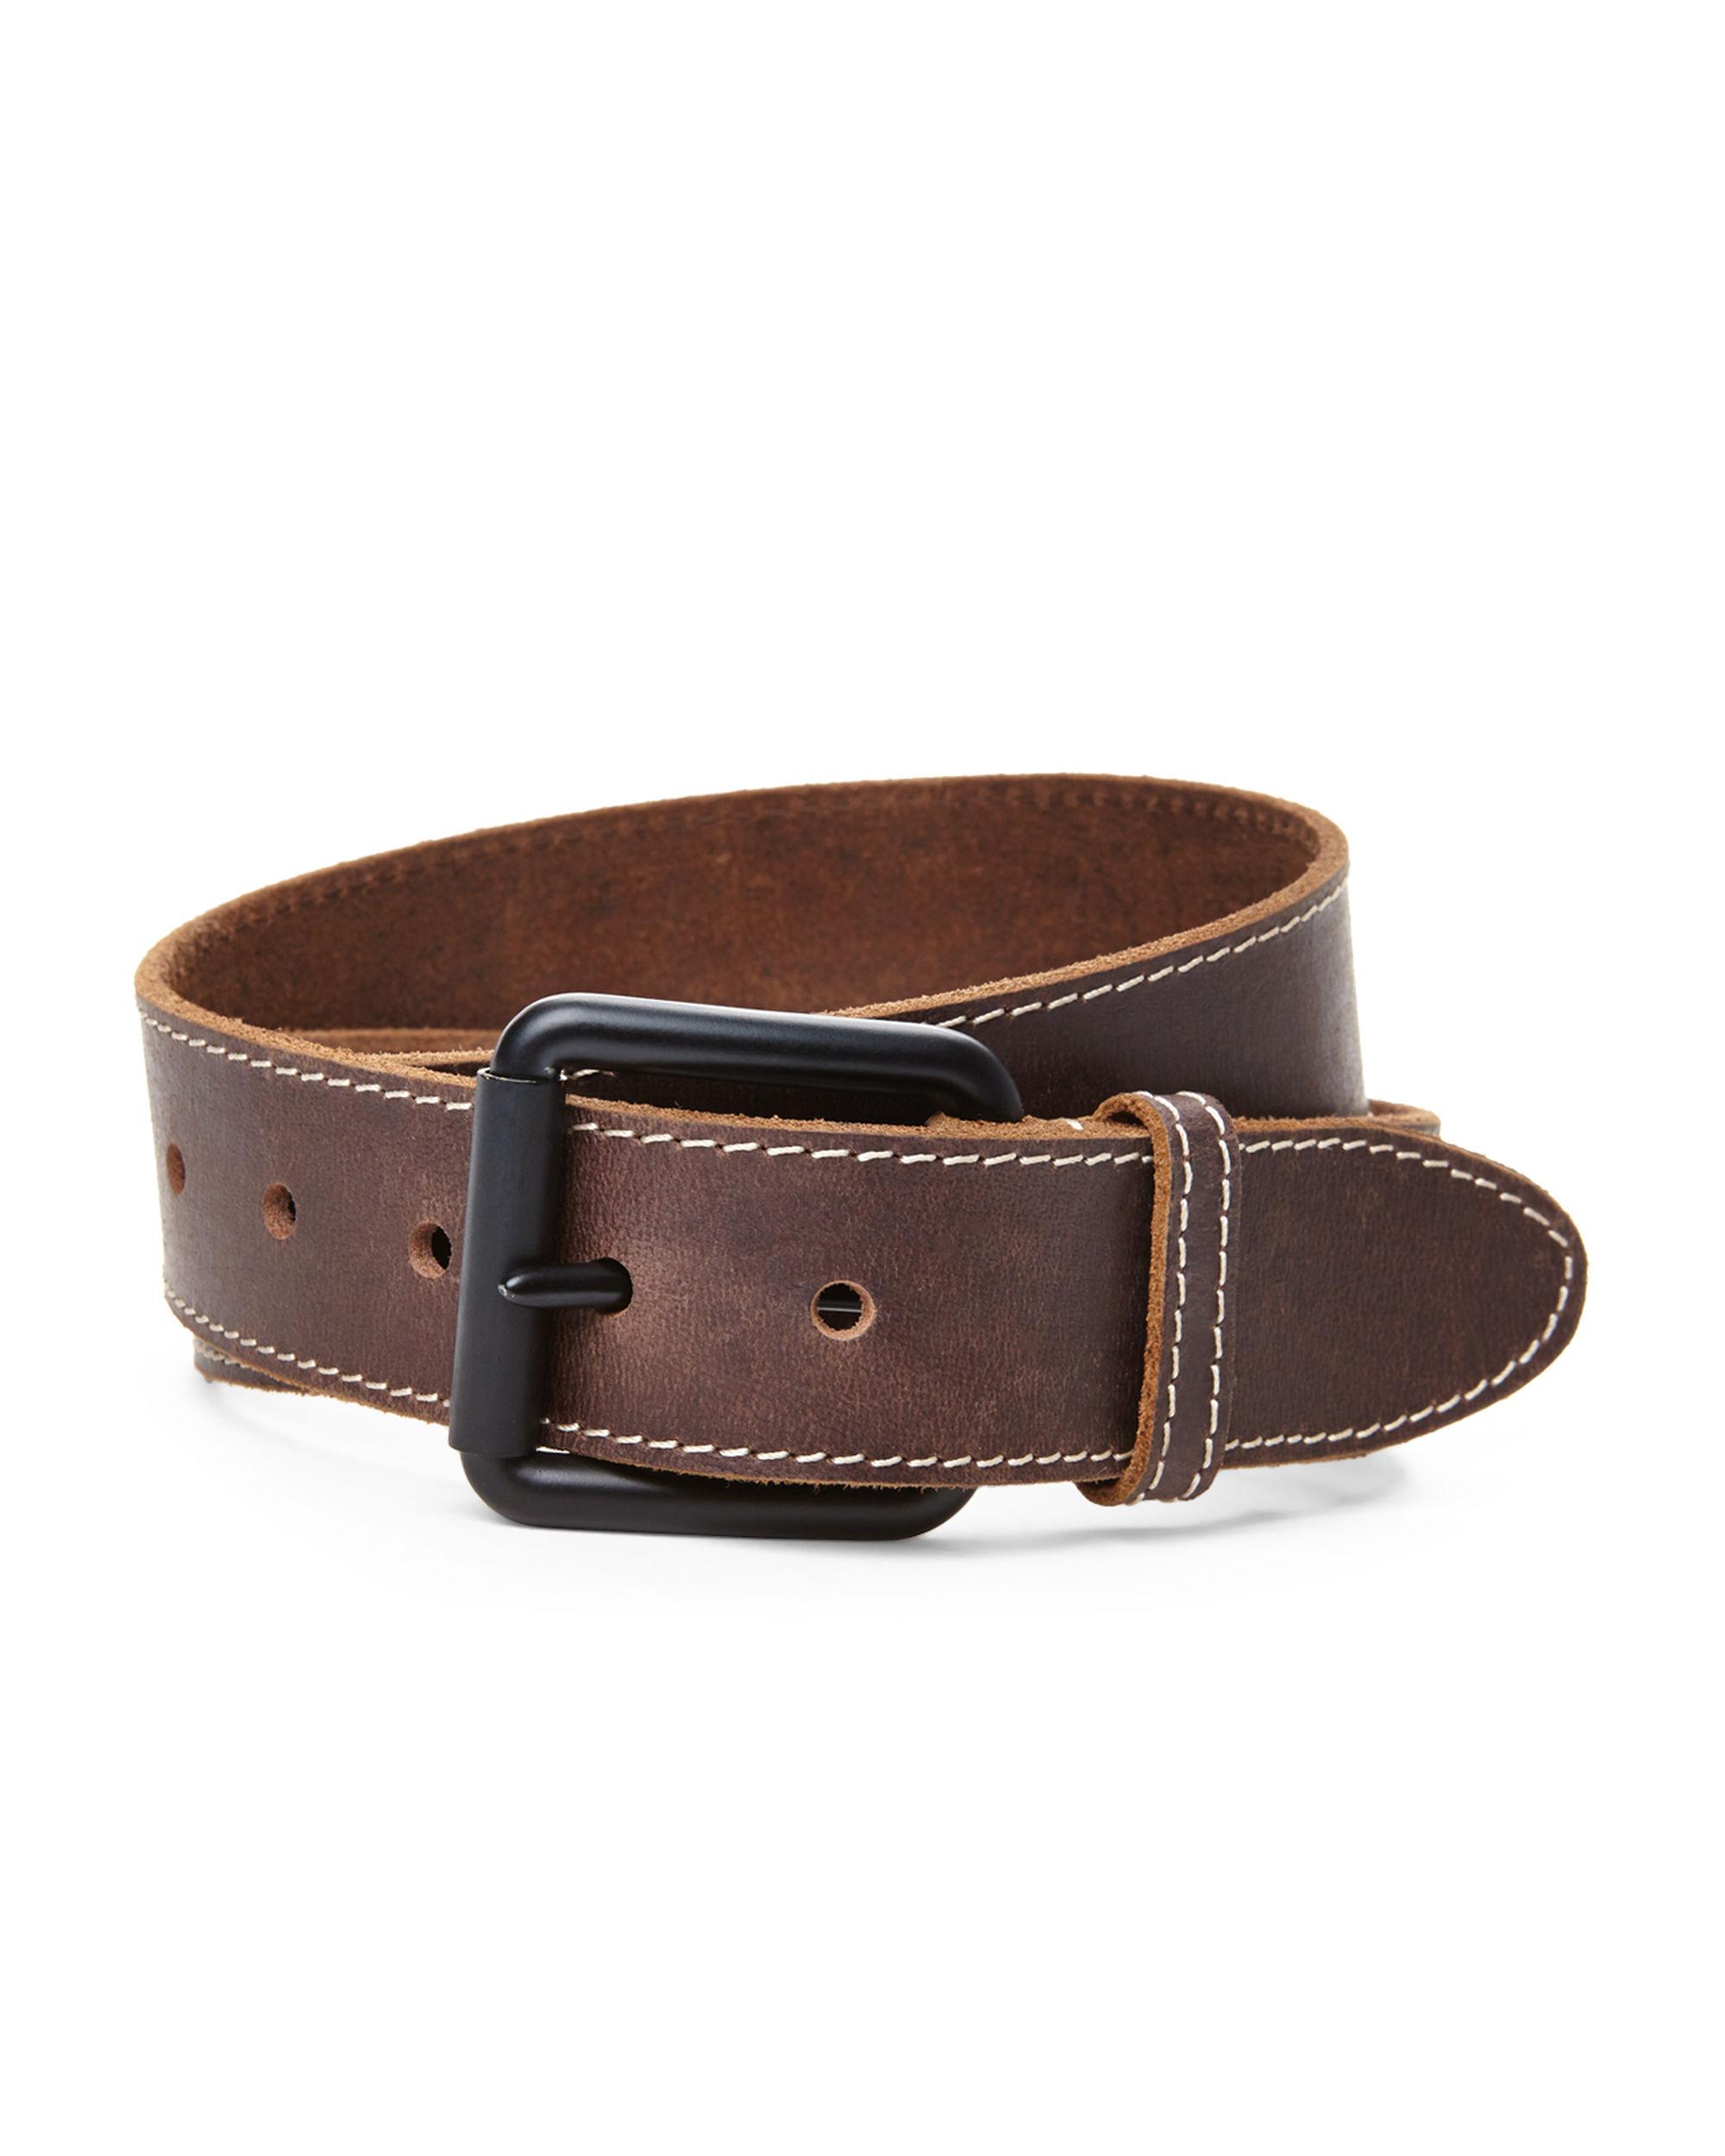 Timberland Leather Belt in Brown for Men - Lyst